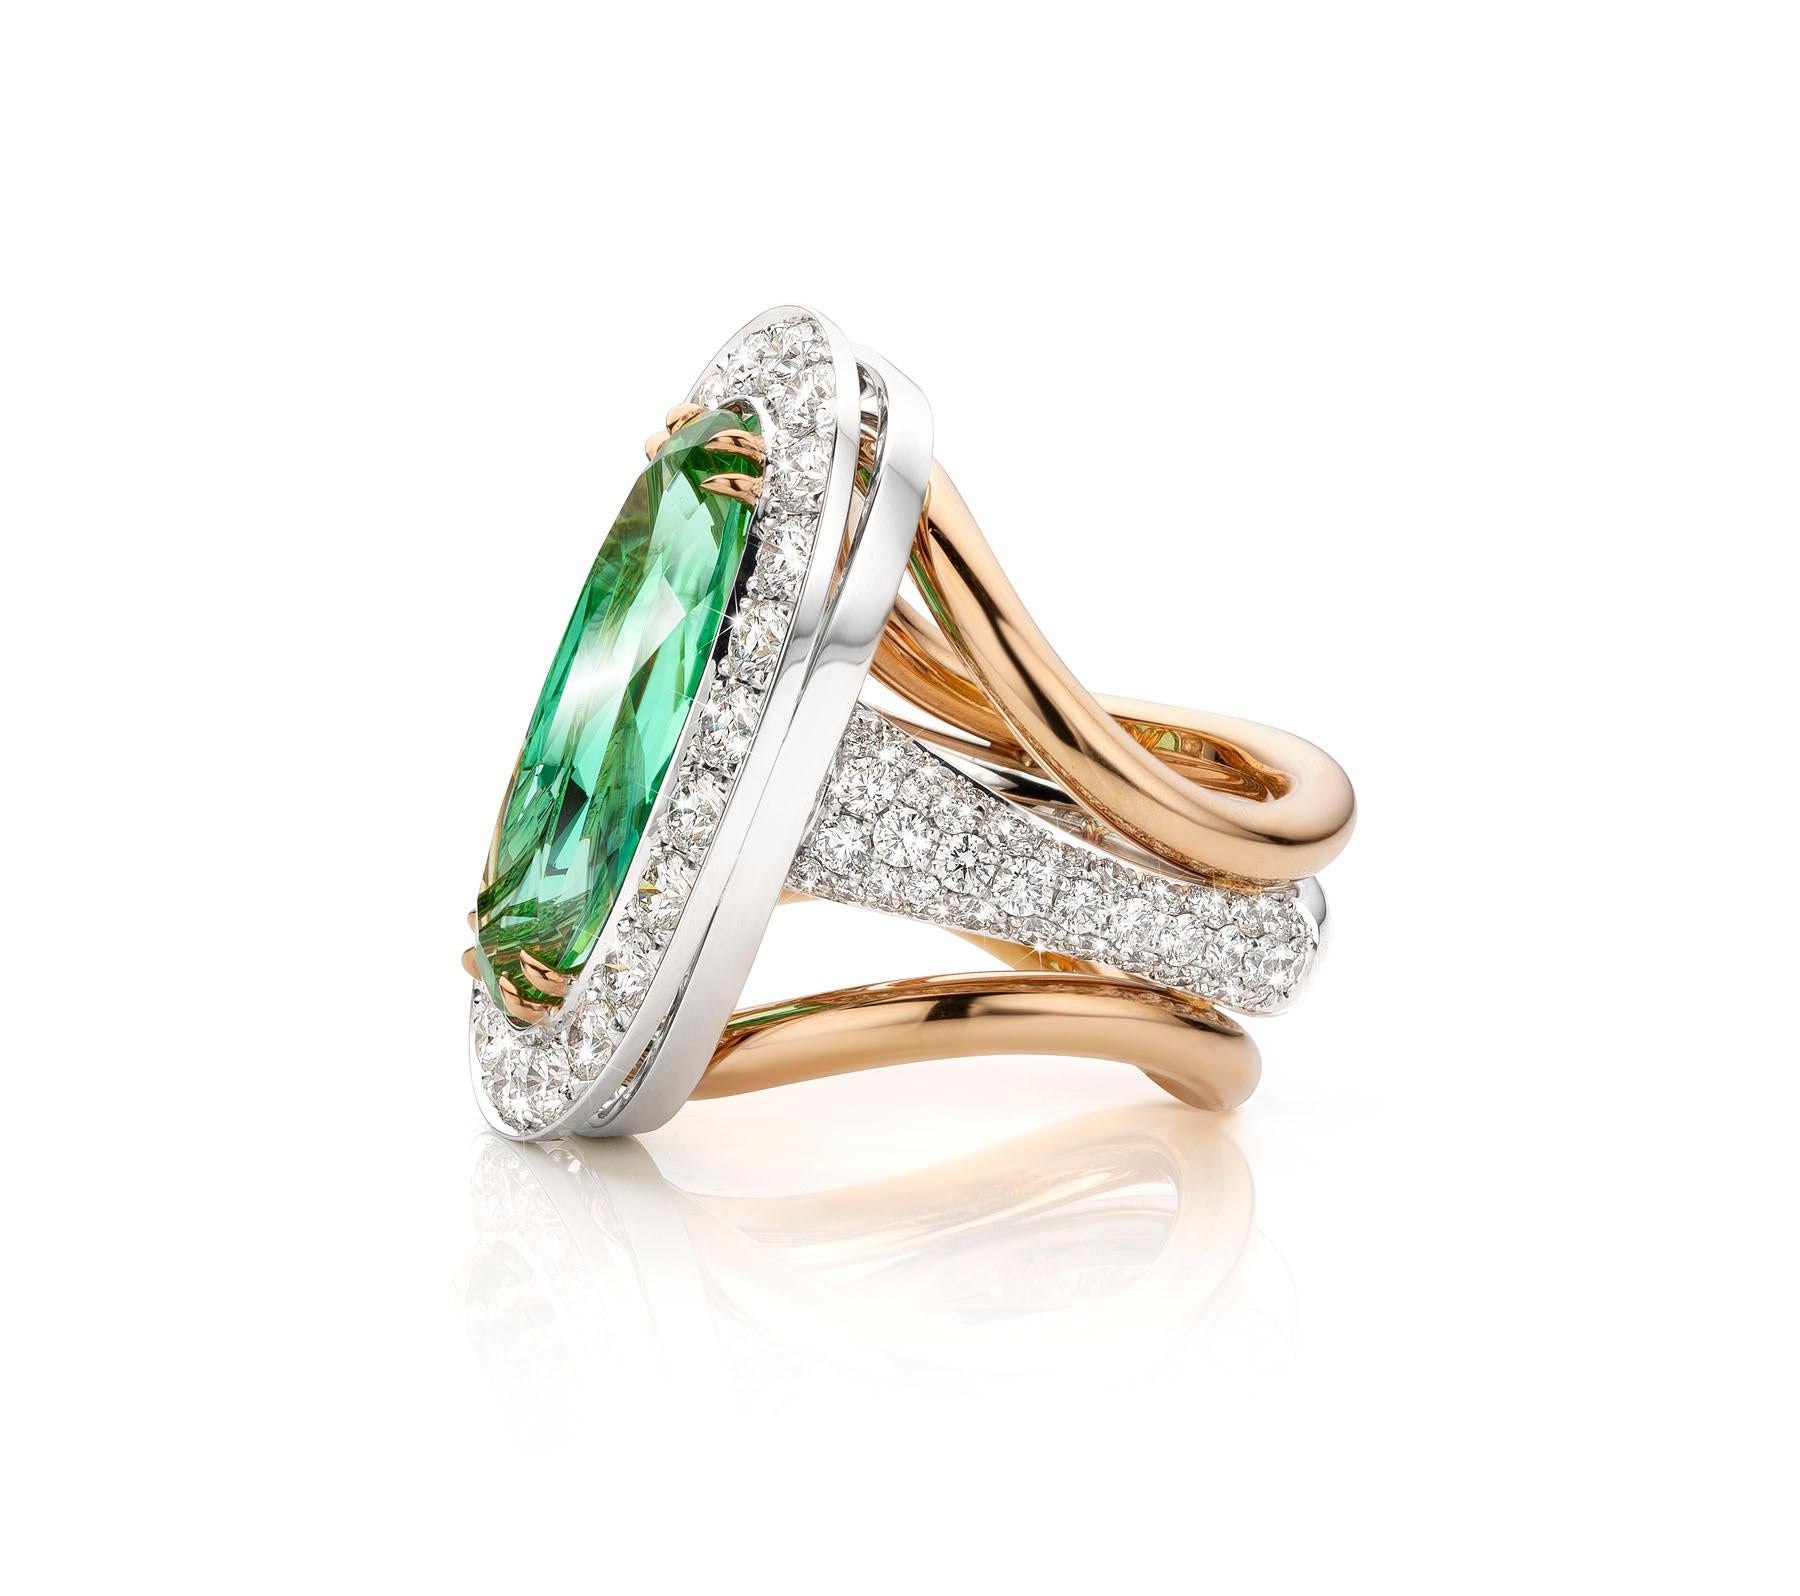 Oval Cut 18K White & Yellow Gold 10.37 Carat Mint Tourmaline Cocktail Ring by Jochen Leën For Sale